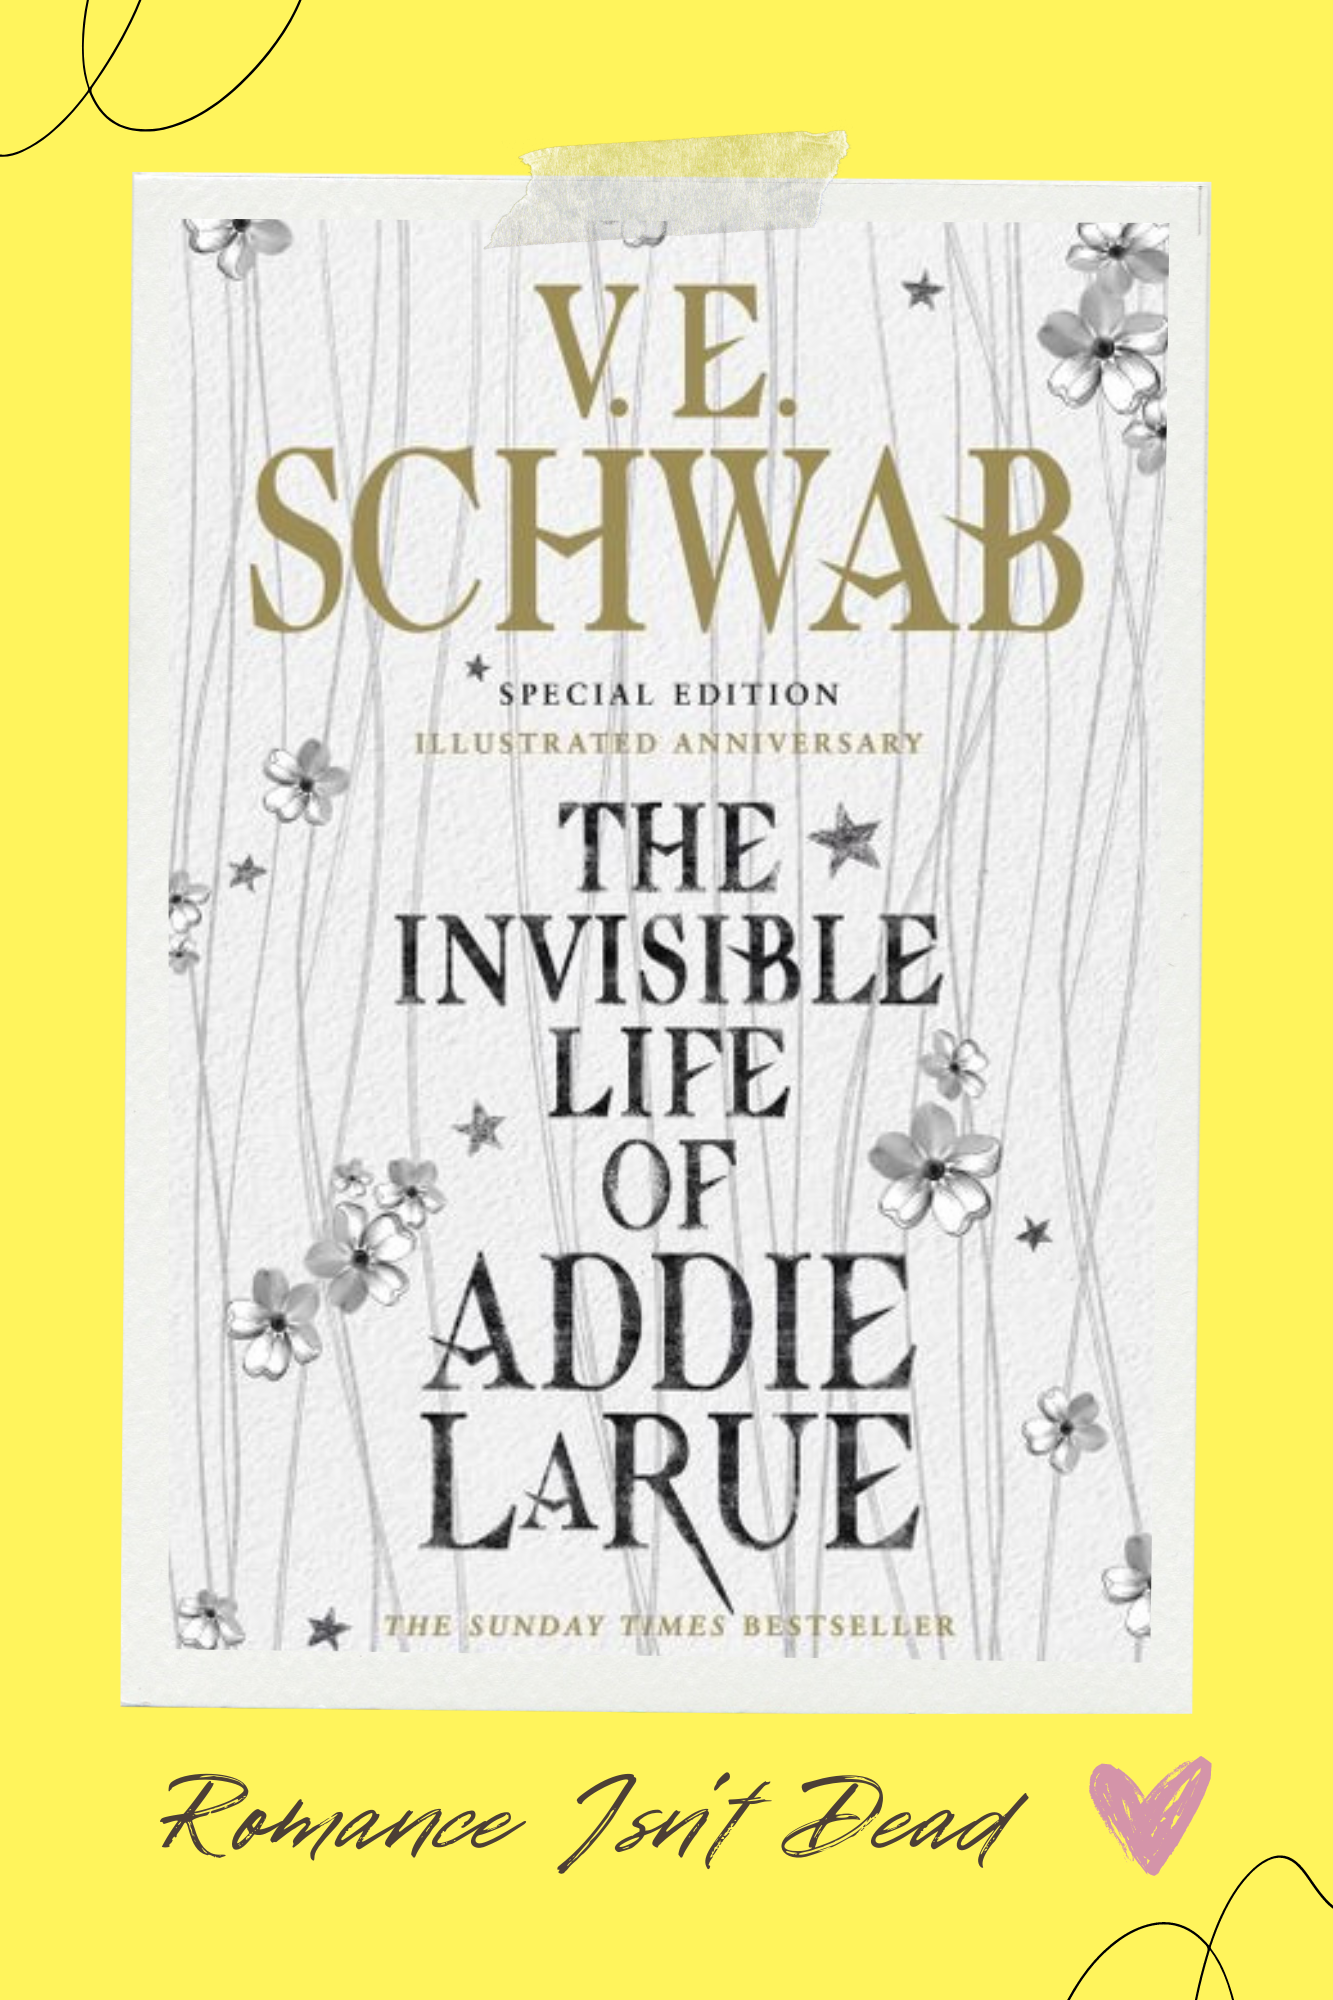 <img src="the invisible.jpg" alt="the invisible life of addie la rue"/>